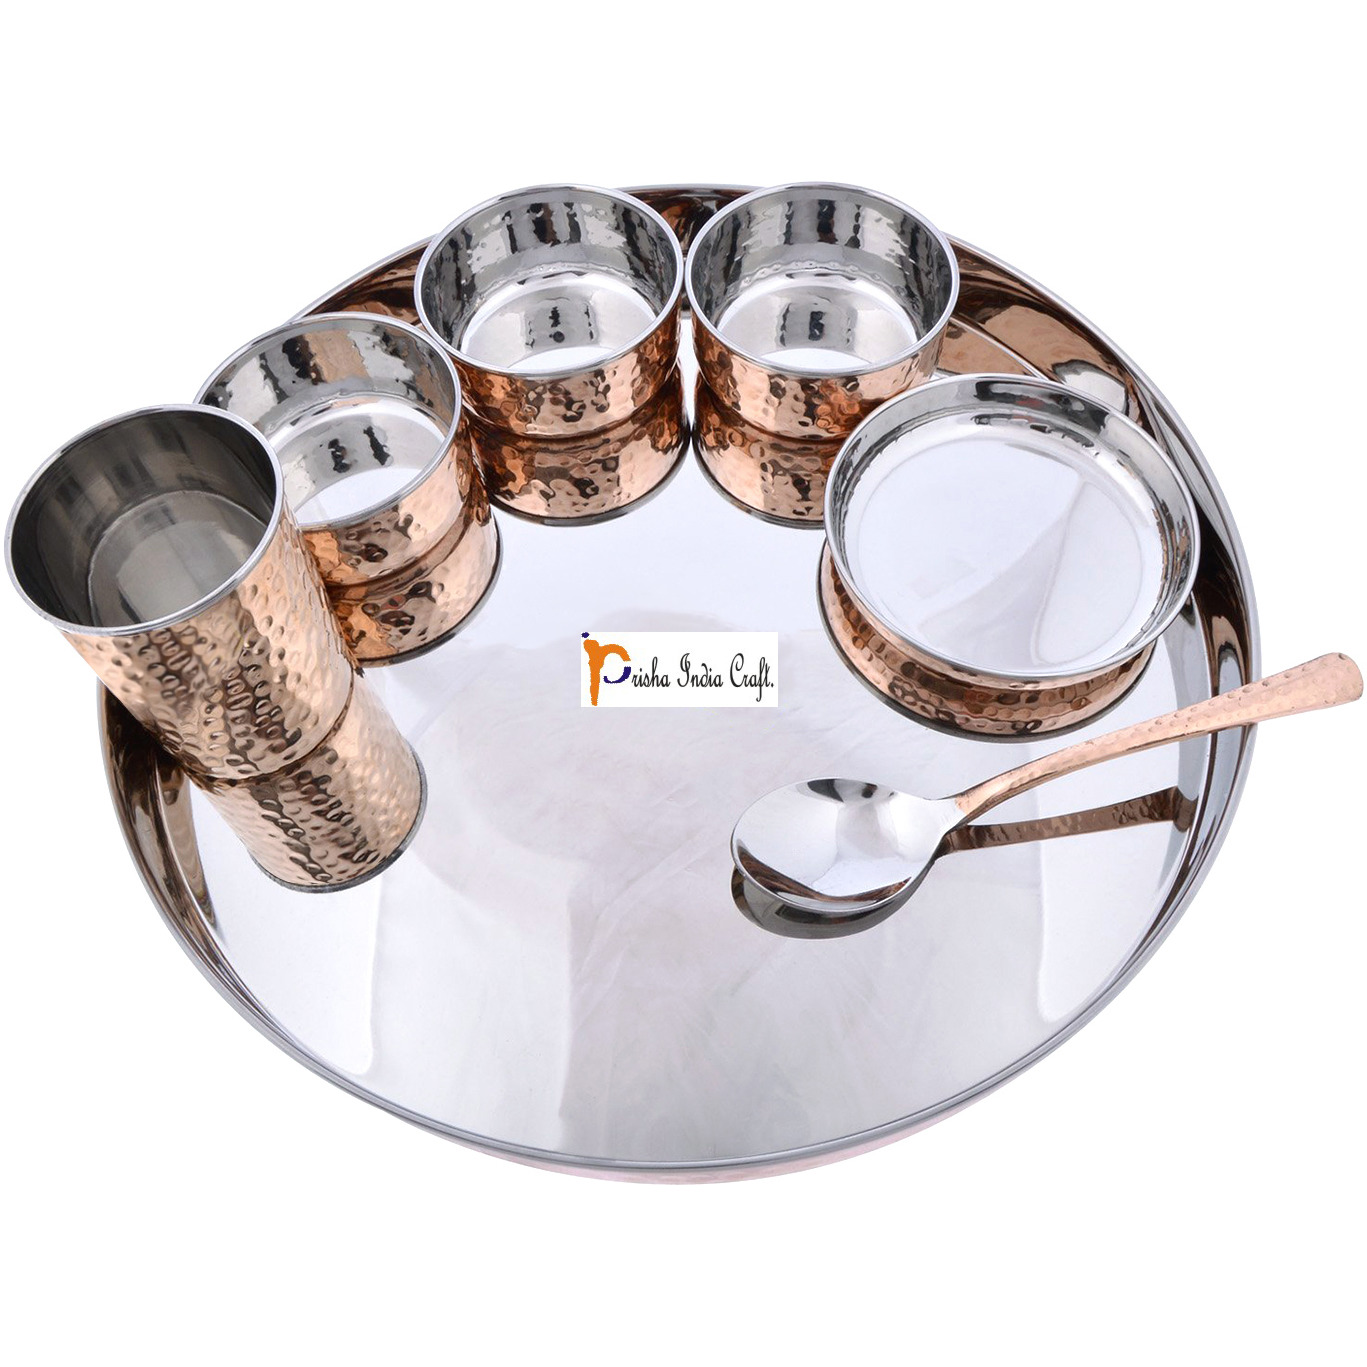 Prisha India Craft B. Dinnerware Traditional Stainless Steel Copper Dinner Set of Thali Plate, Bowls, Glass and Spoon, Dia 13  With 1 Pure Copper Classic Pitcher Jug - Christmas Gift